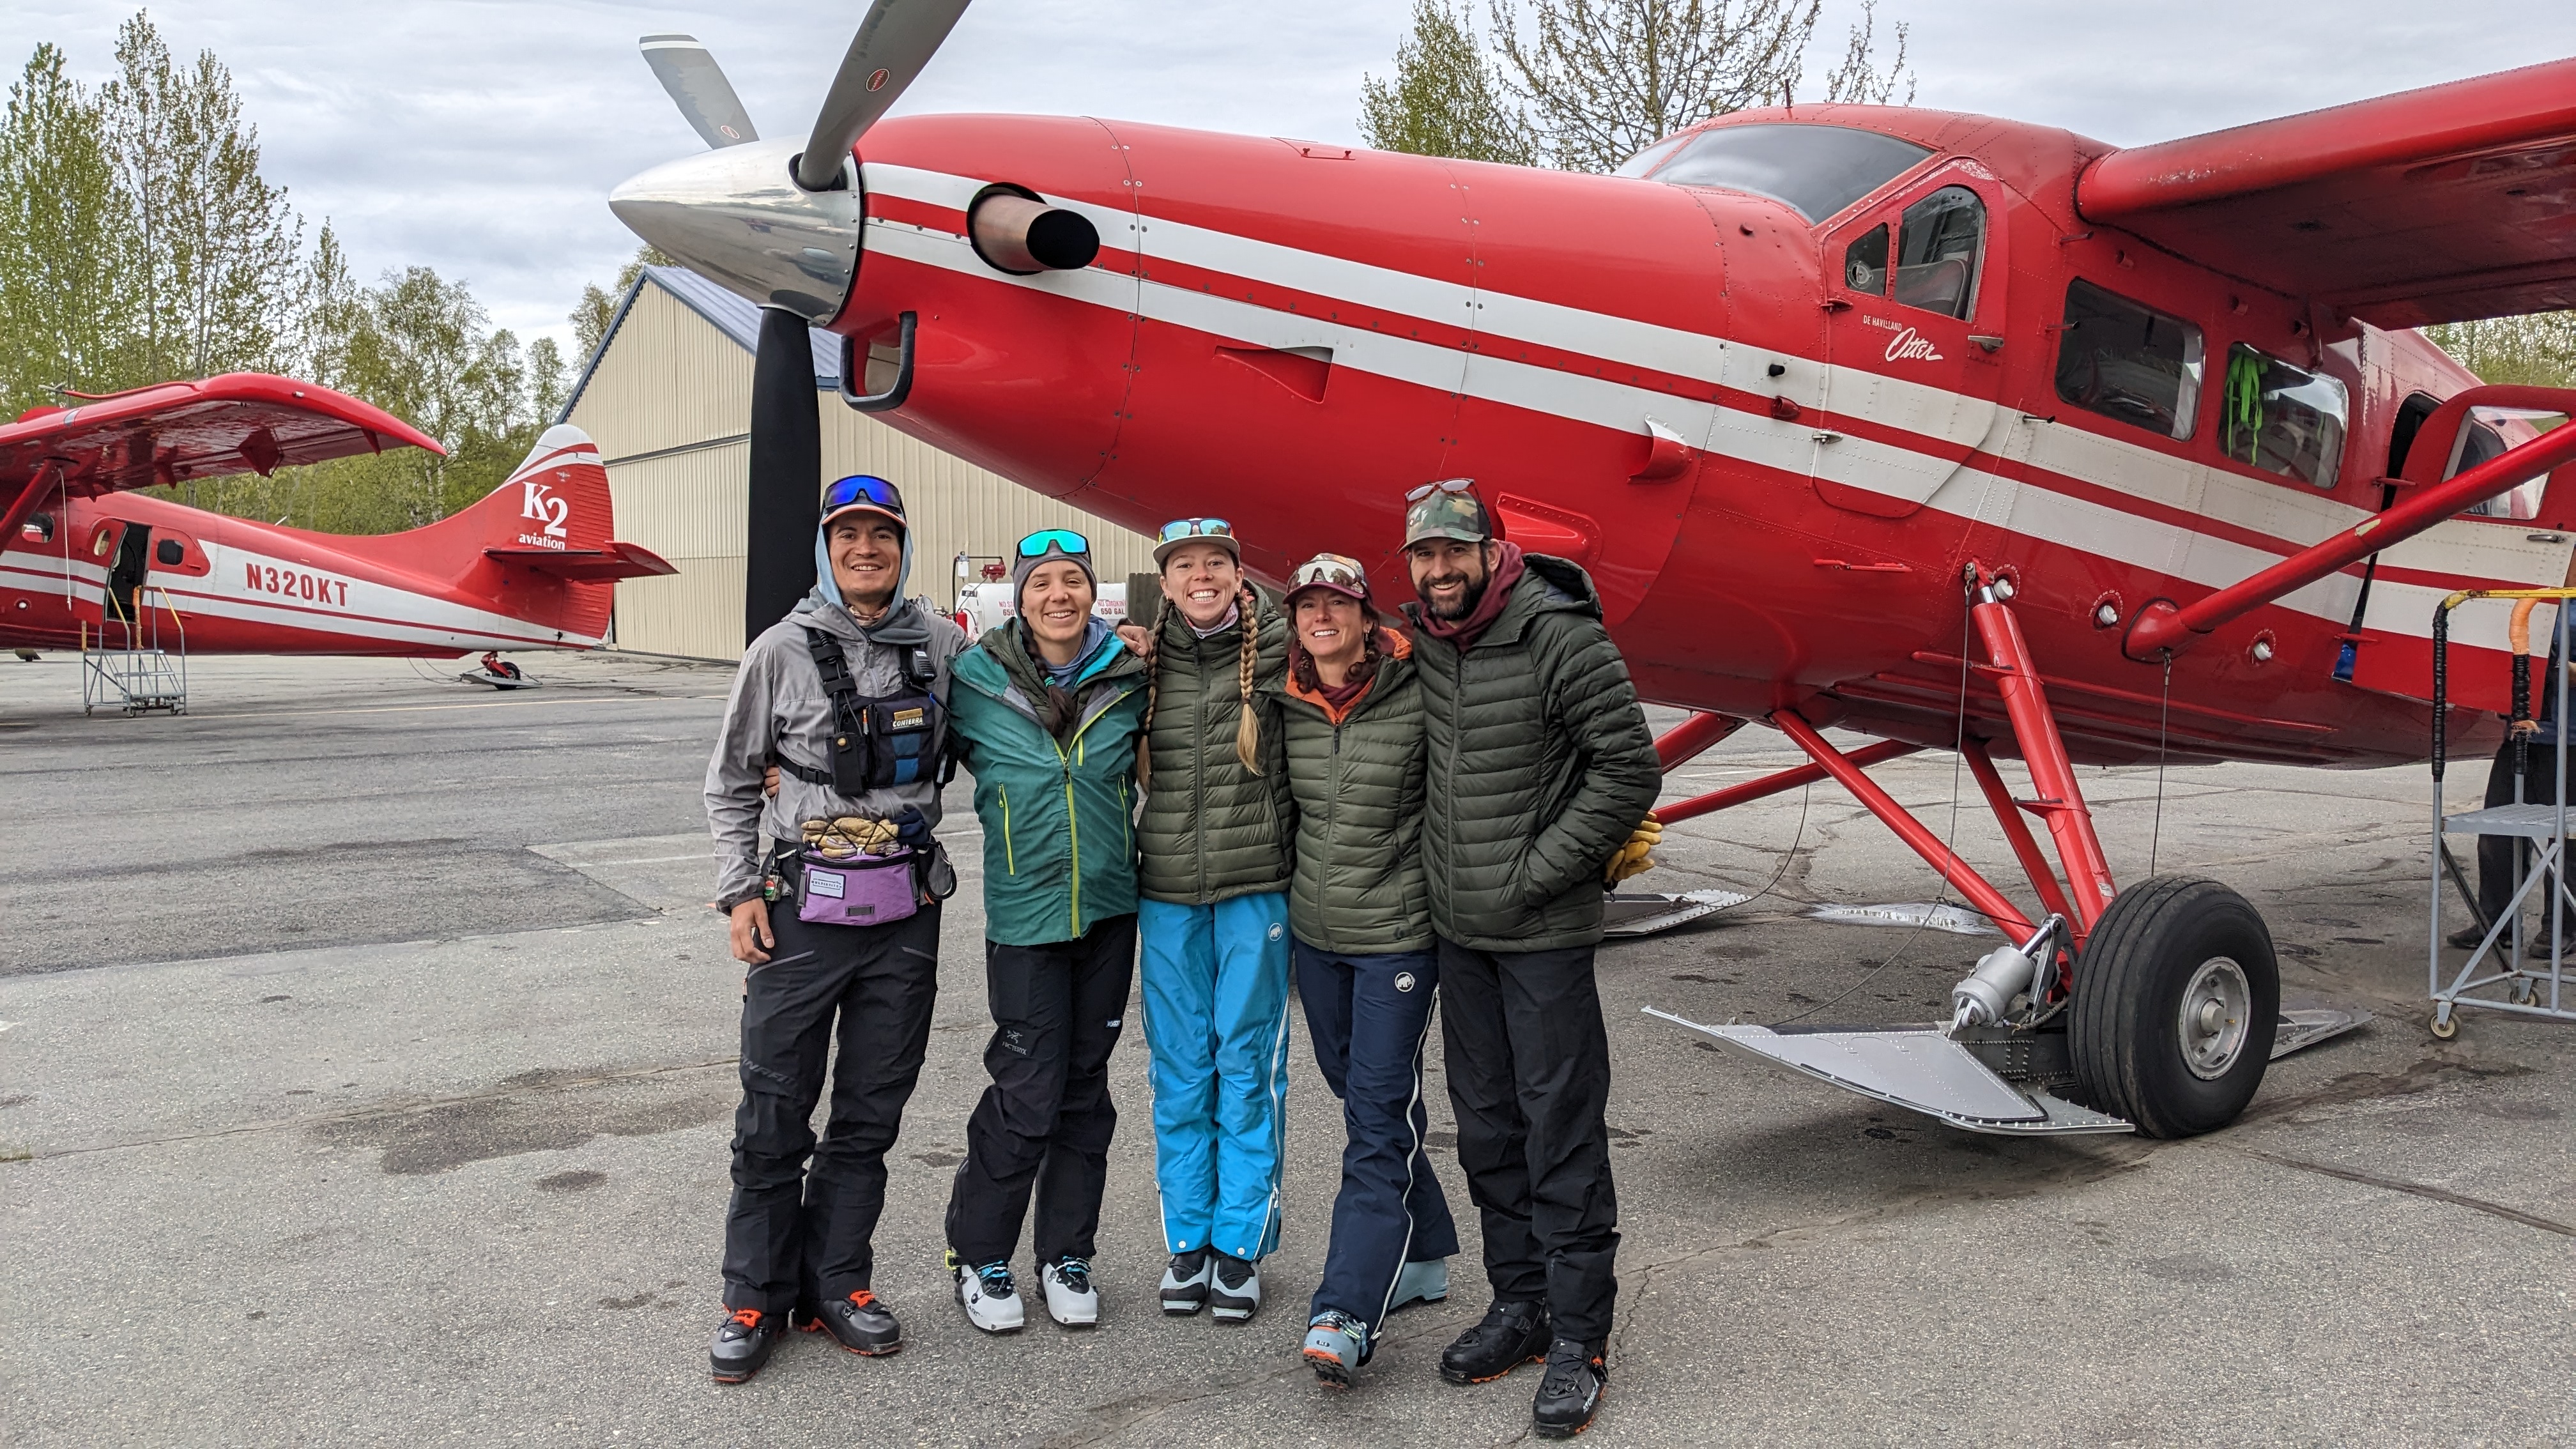 Five mountaineers pose outside a small airplane